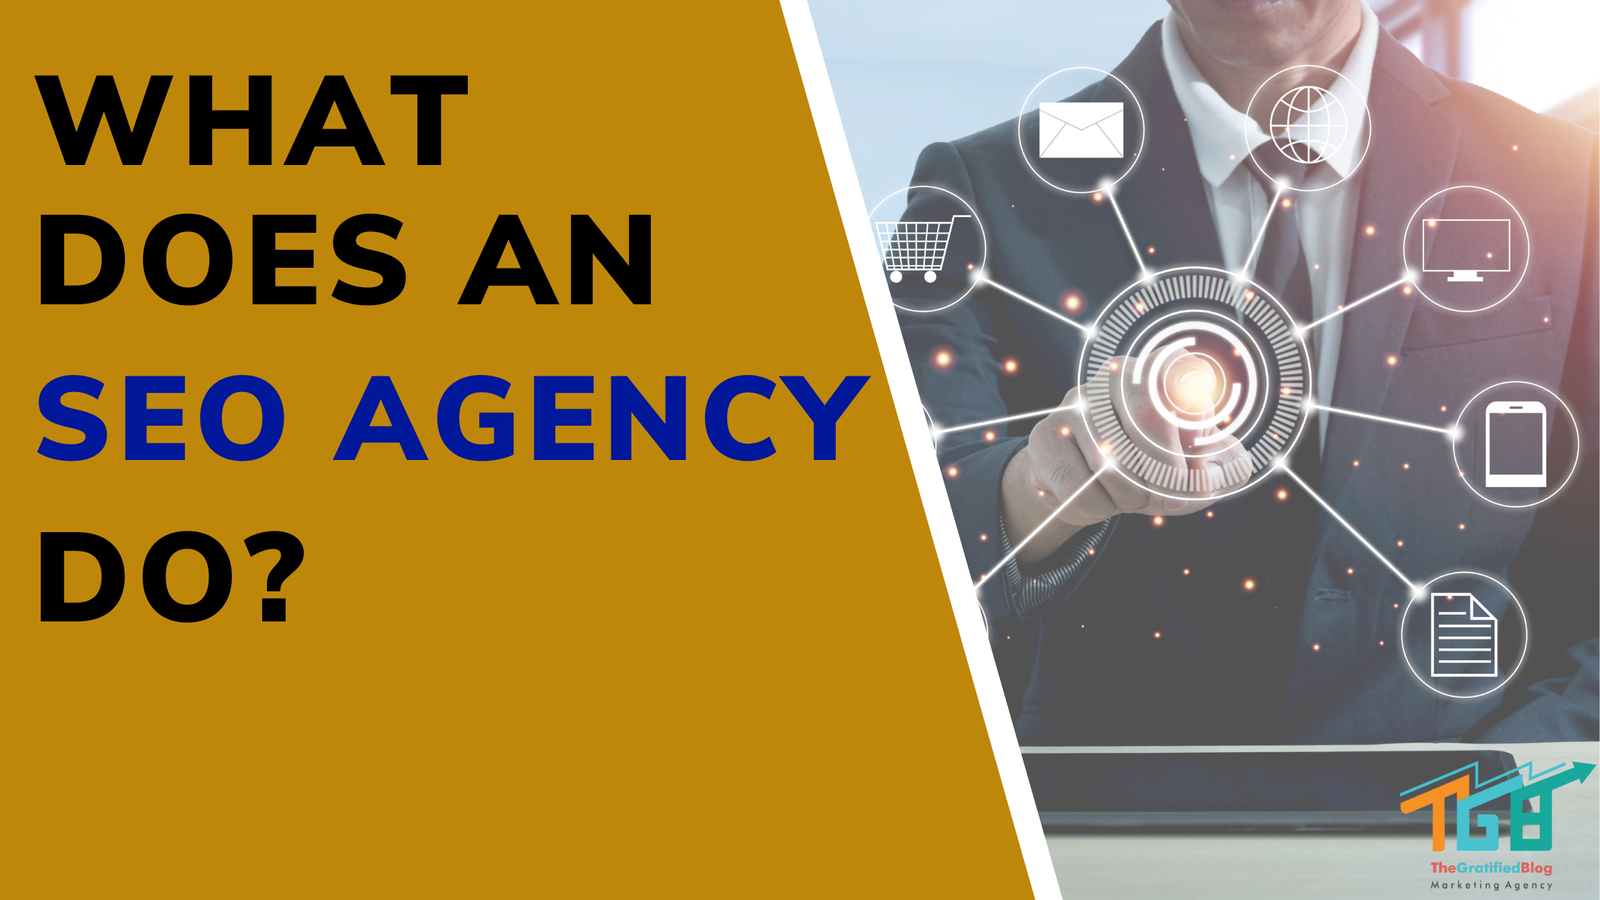 What Does An SEO Agency Do